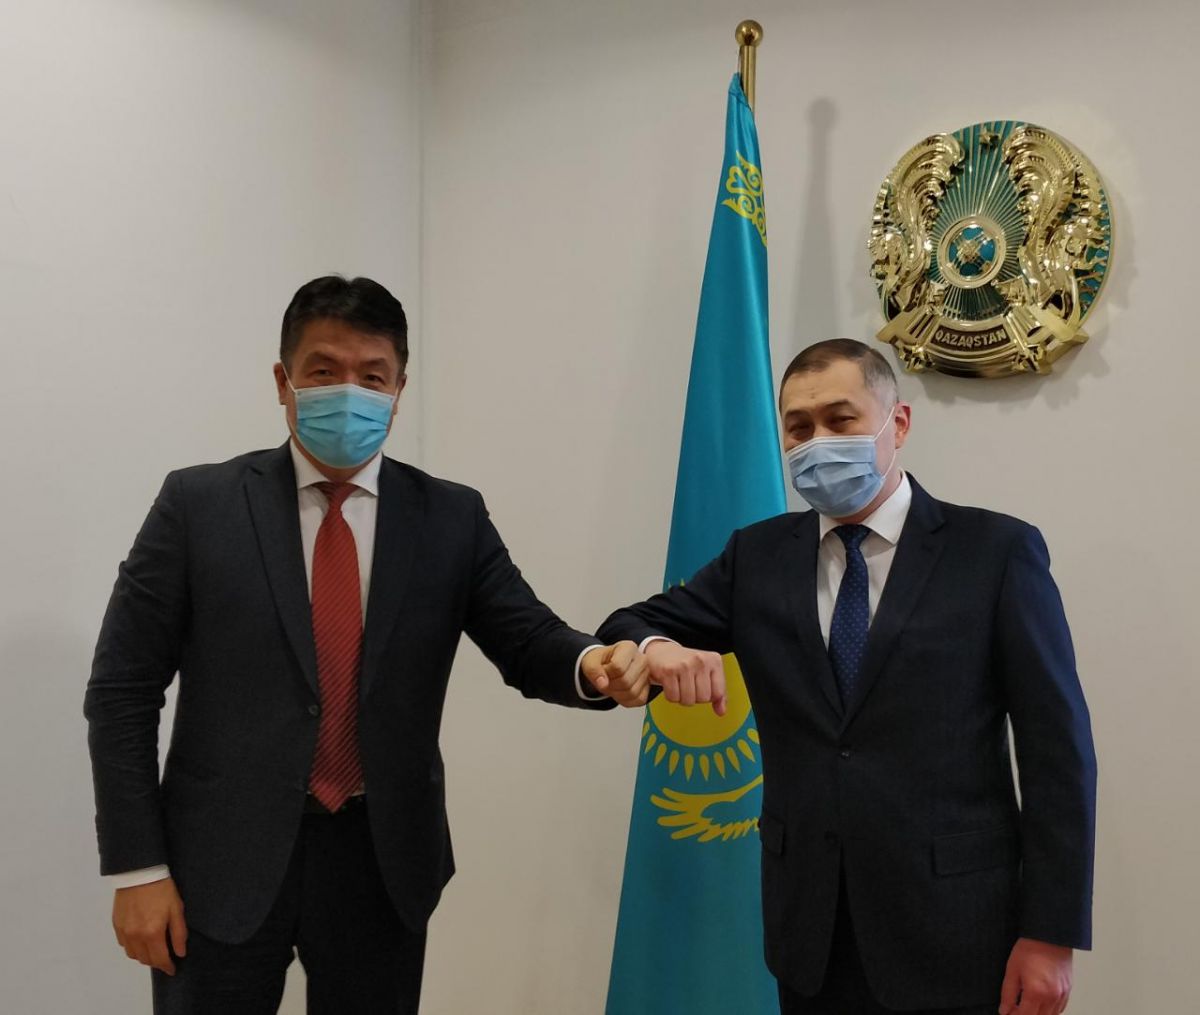 Director-General of IOFS meets the First Deputy Minister of Foreign Affairs of the Republic of Kazakhstan Shahrat Nuryshev